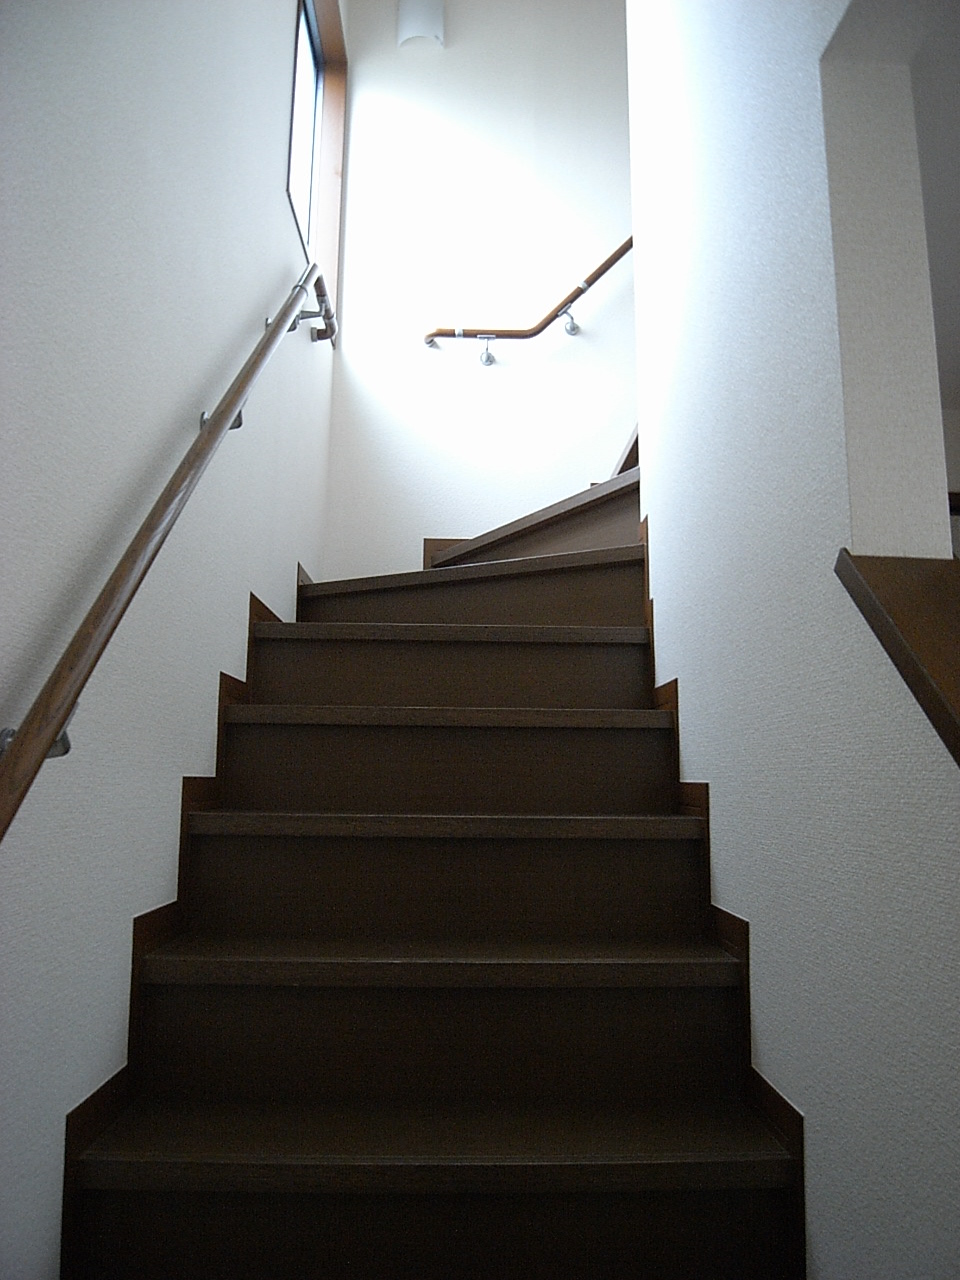 Other. Handrail is attached to the stairs.